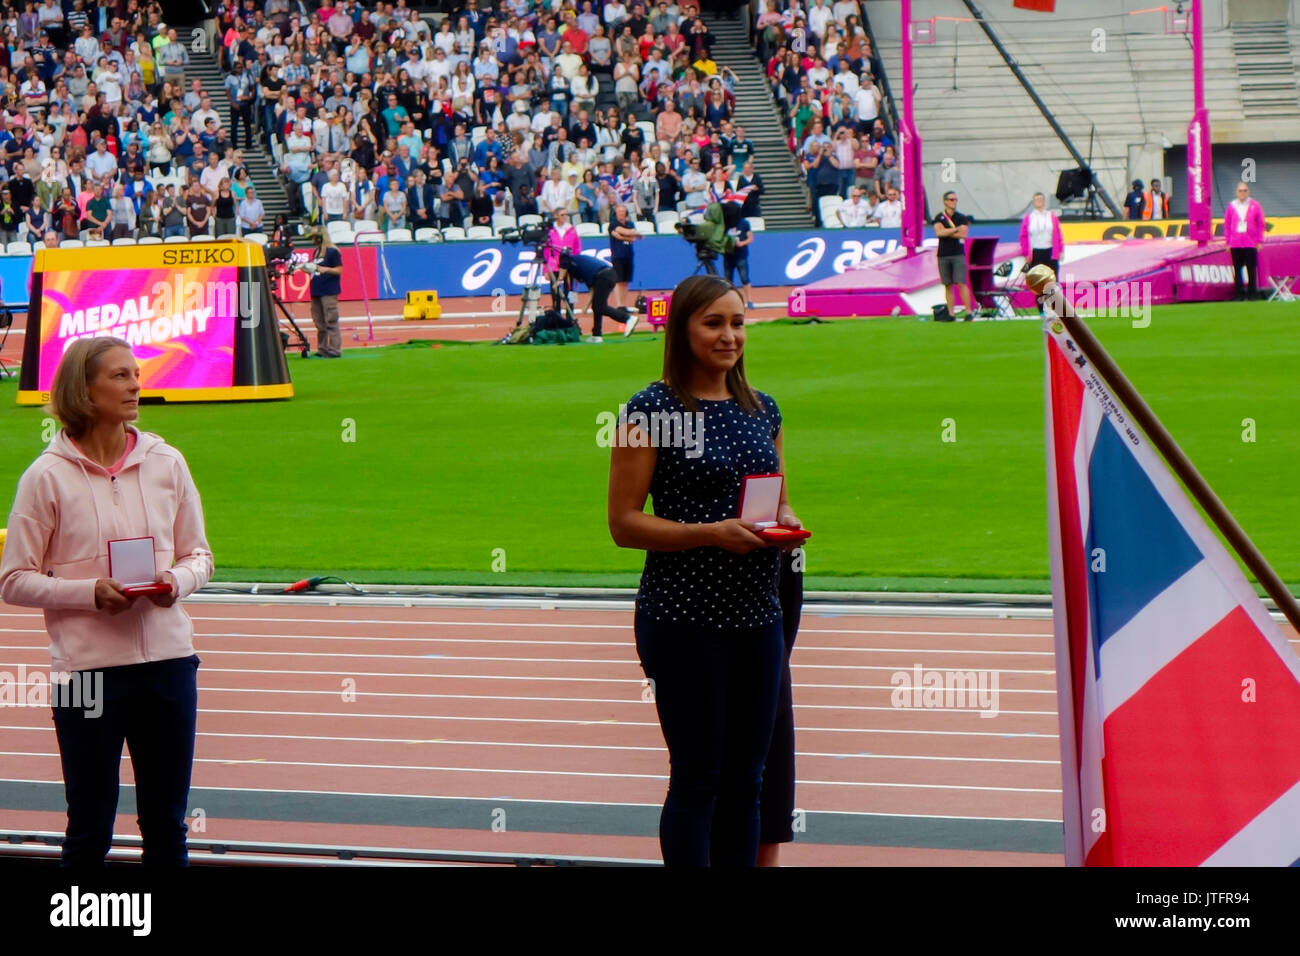 August 6th 2017, London Stadium, East London, England; IAAF World Championships, Jennifer Oeser of Germany and Jessica Ennis of Great Britain Stock Photo